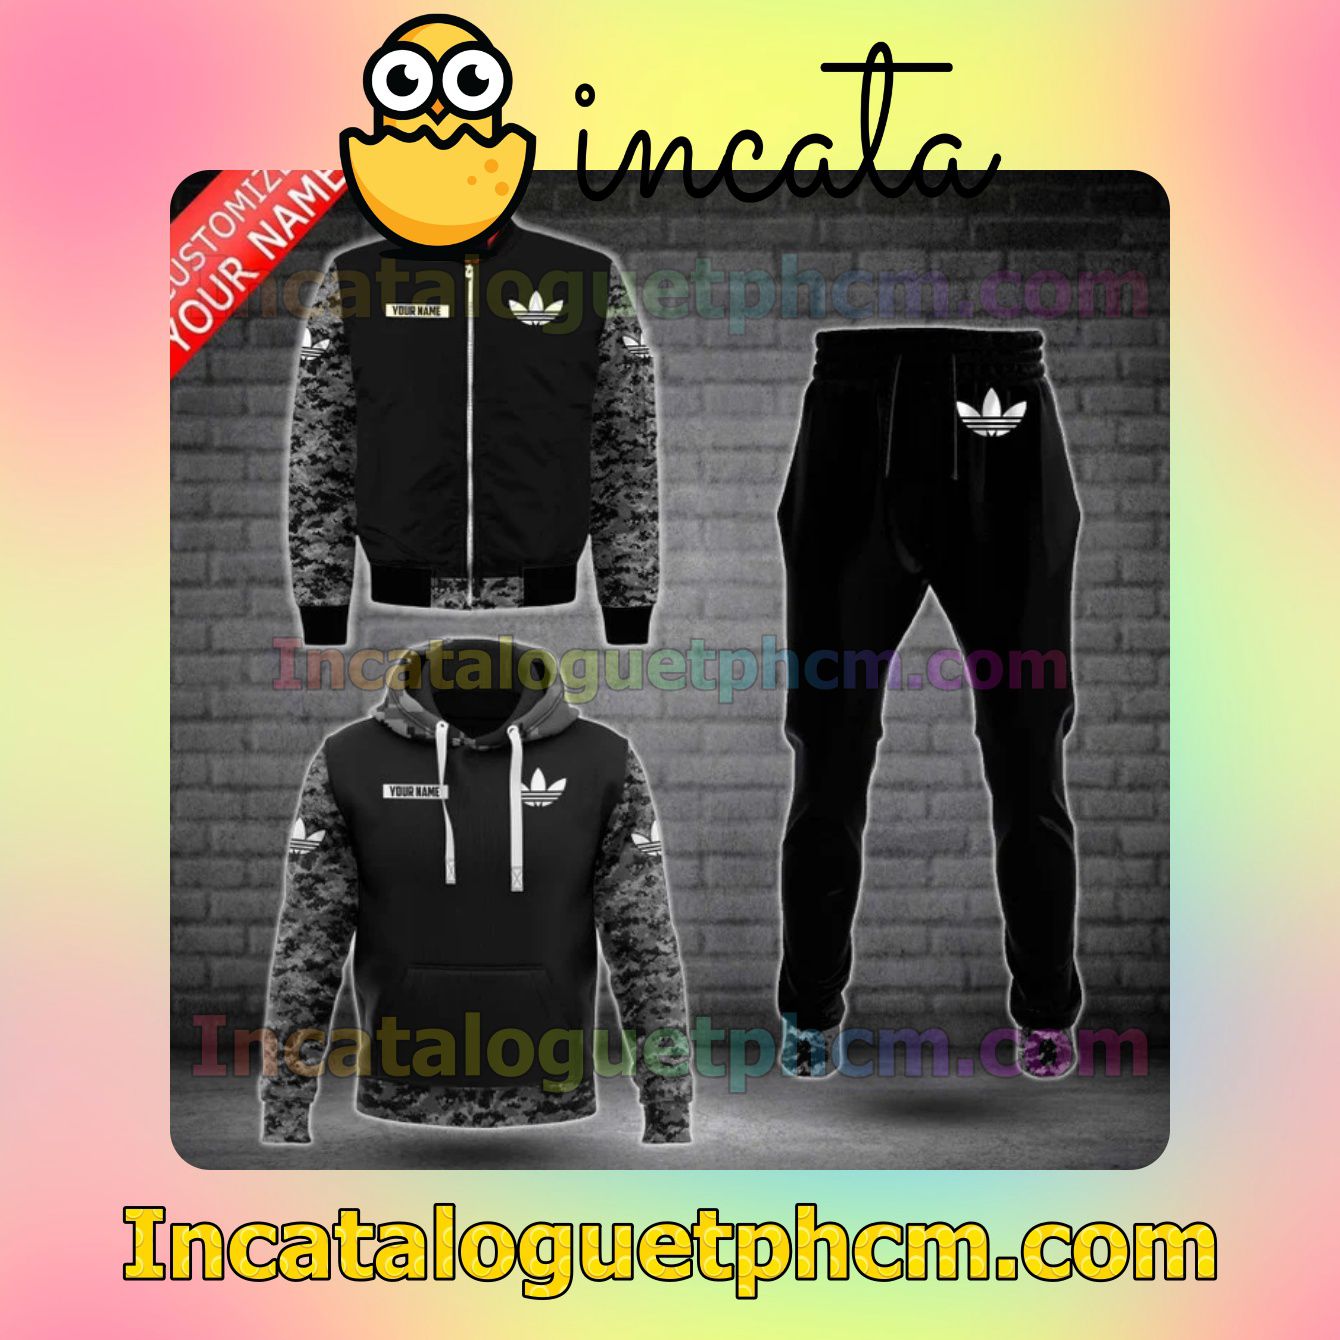 Only For Fan Personalized Adidas Black With Grey Camouflage Zipper Hooded Sweatshirt And Pants